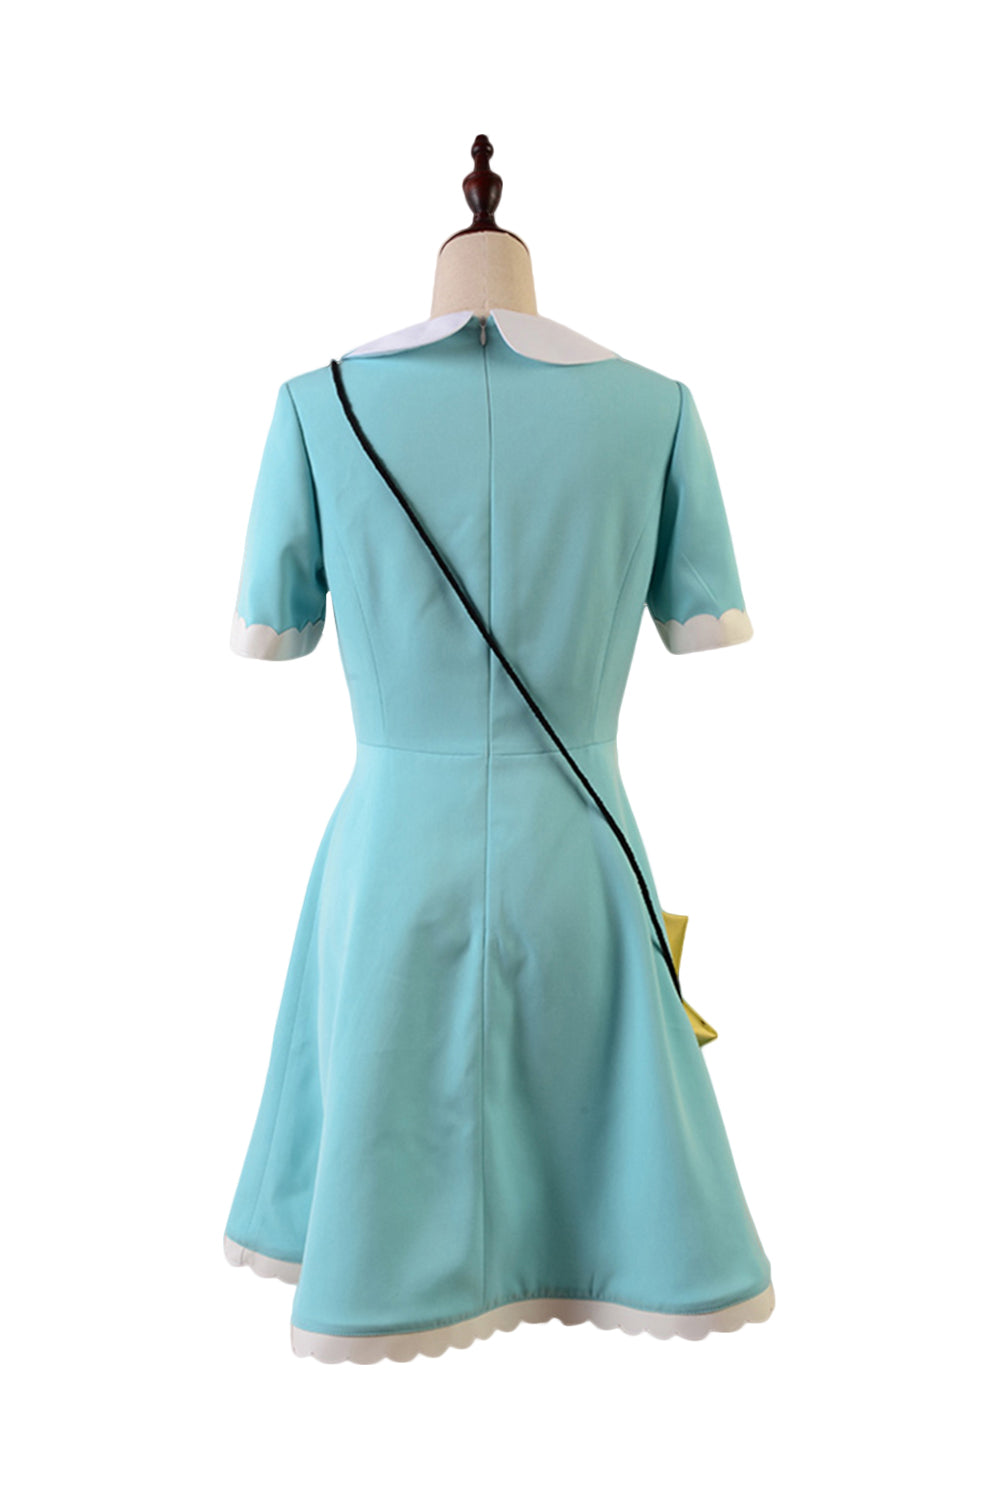 Star vs. the Forces of Evil Princess Star Butterfly Kleid Cosplay Kostüm